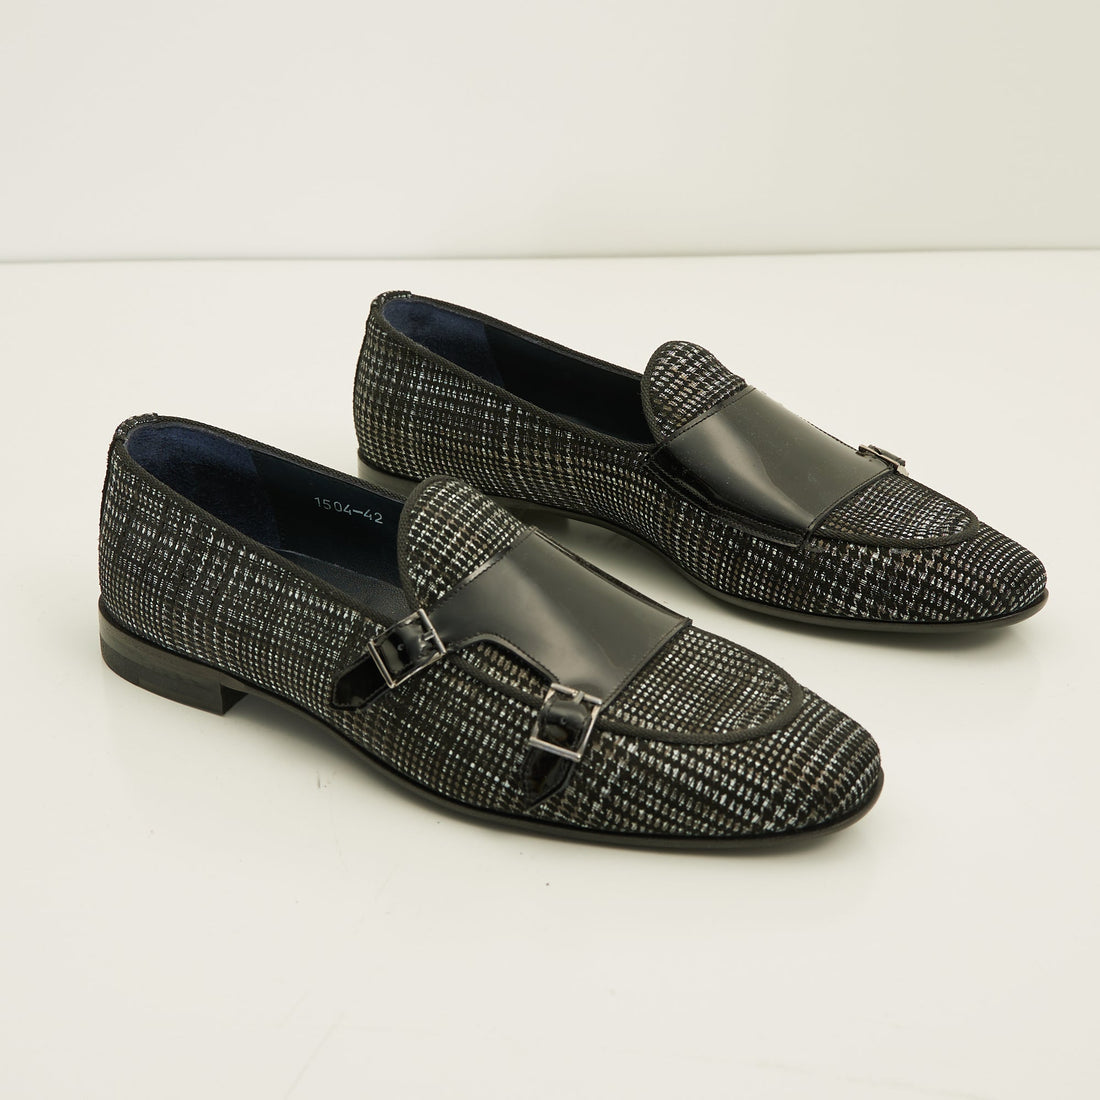 N° AG1504 LEATHER DOUBLE MONK STRAP SHOES - BLACK